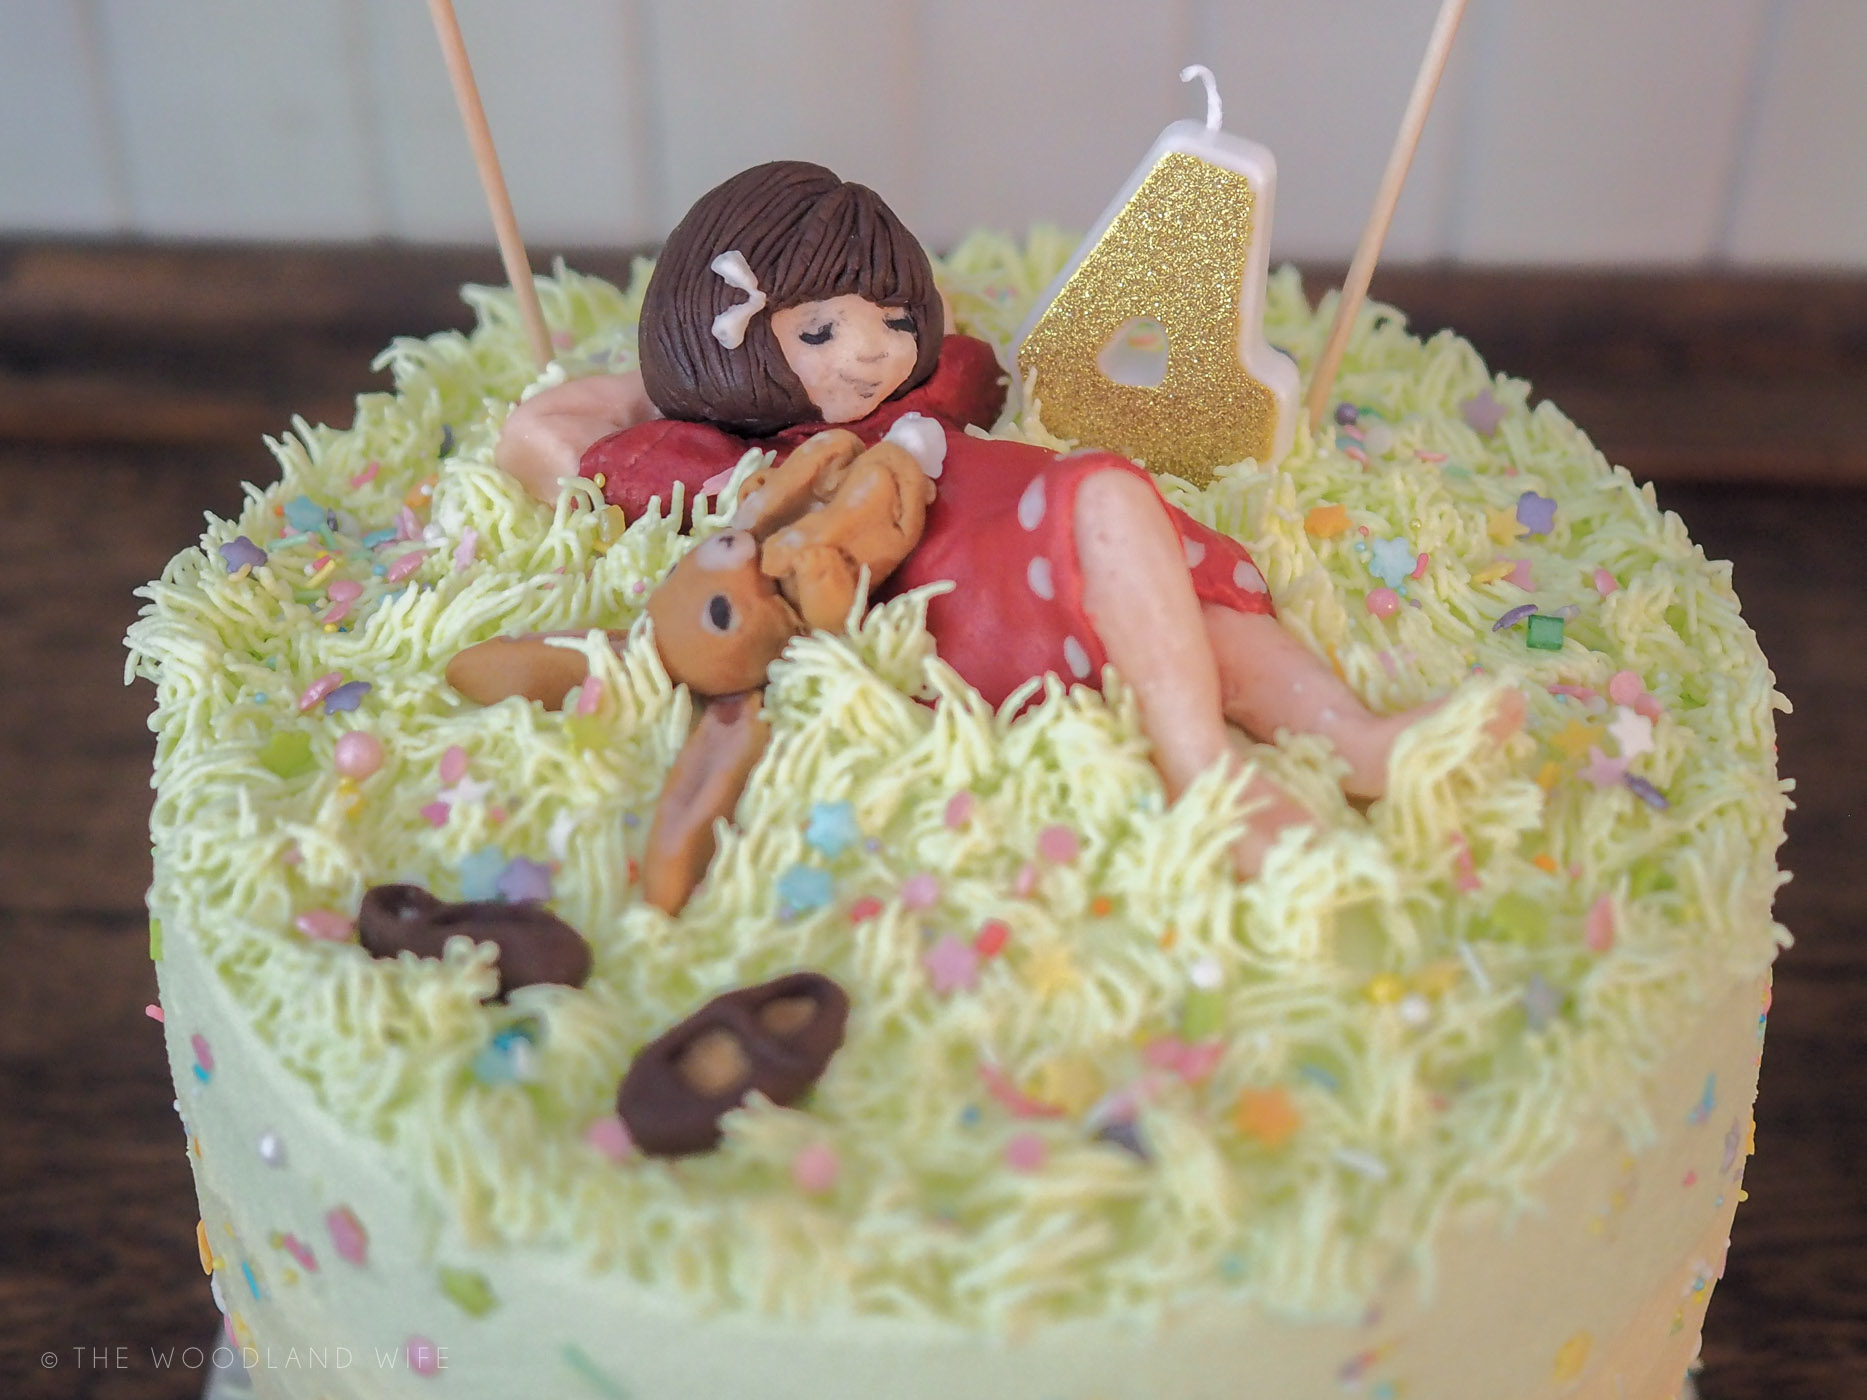 The Woodland Wife - Belle and Boo Birthday Cake - Rainbow Cake - Ombre Cake - Pastel Cake